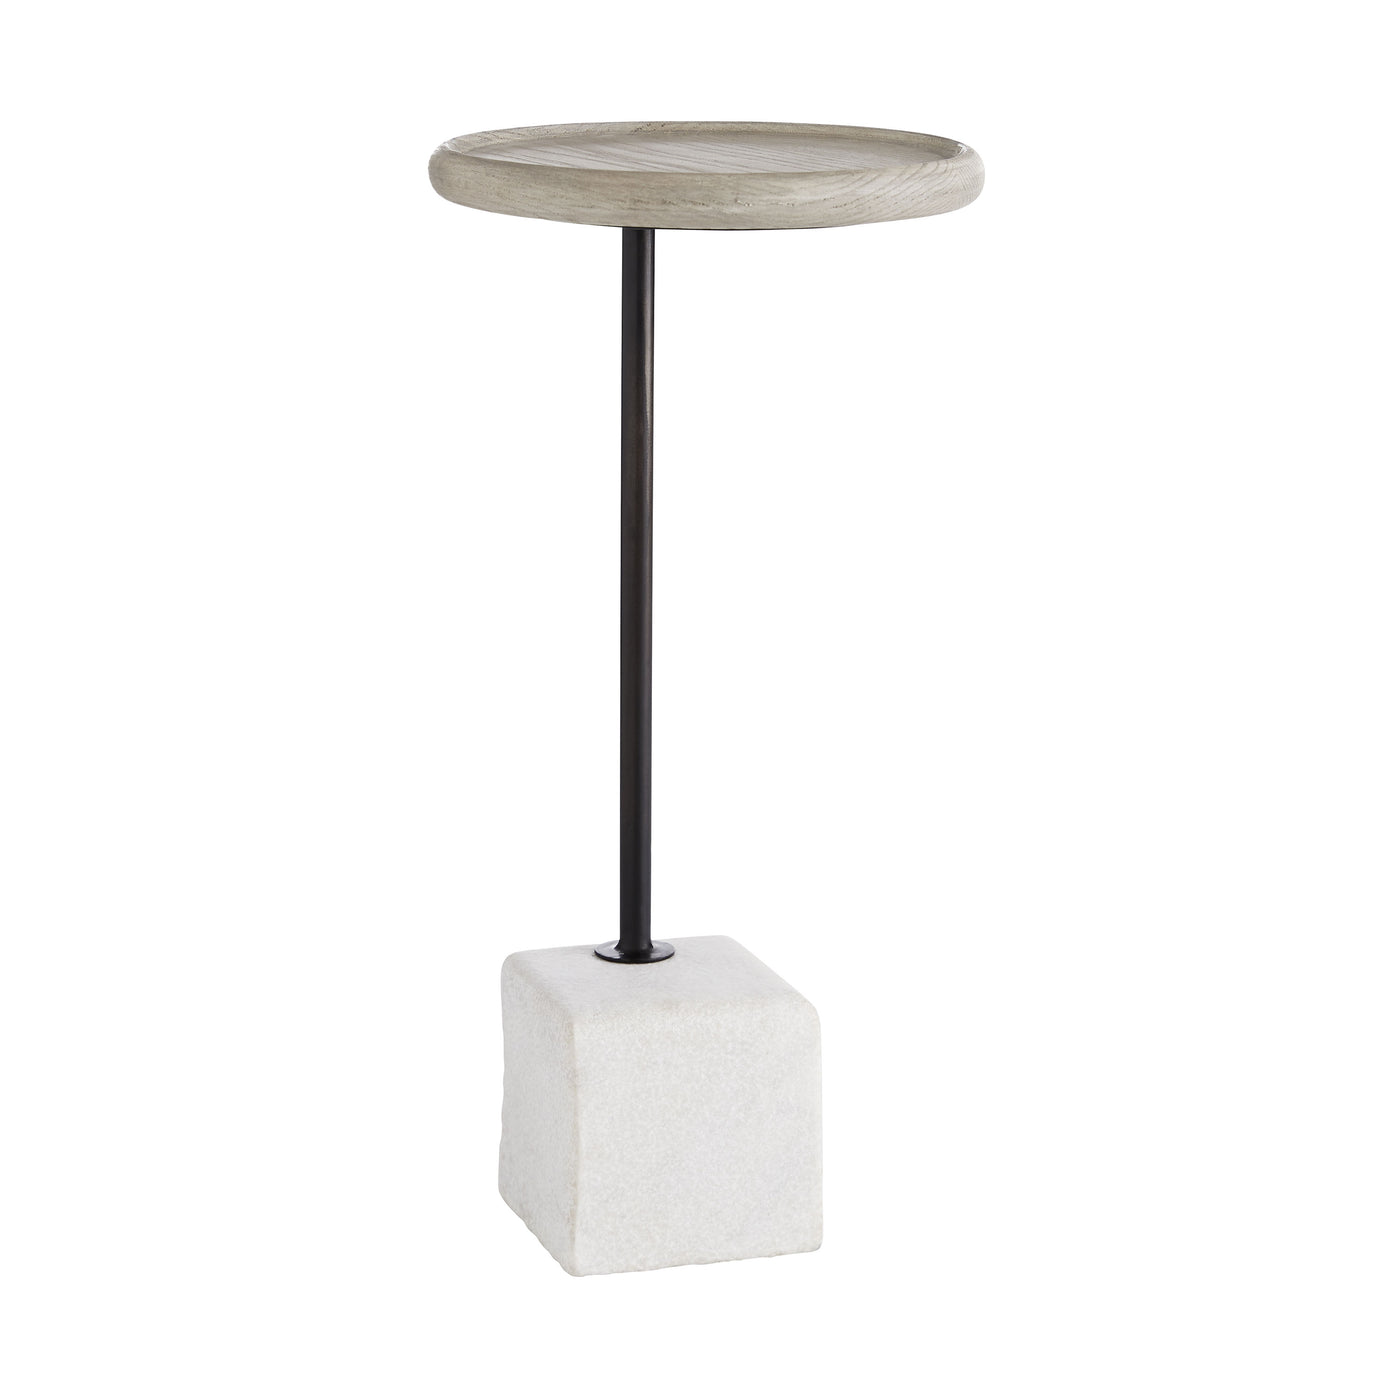 DRINK TABLE WHITE MARBLE BASE WITH OAK SMOKE TOP